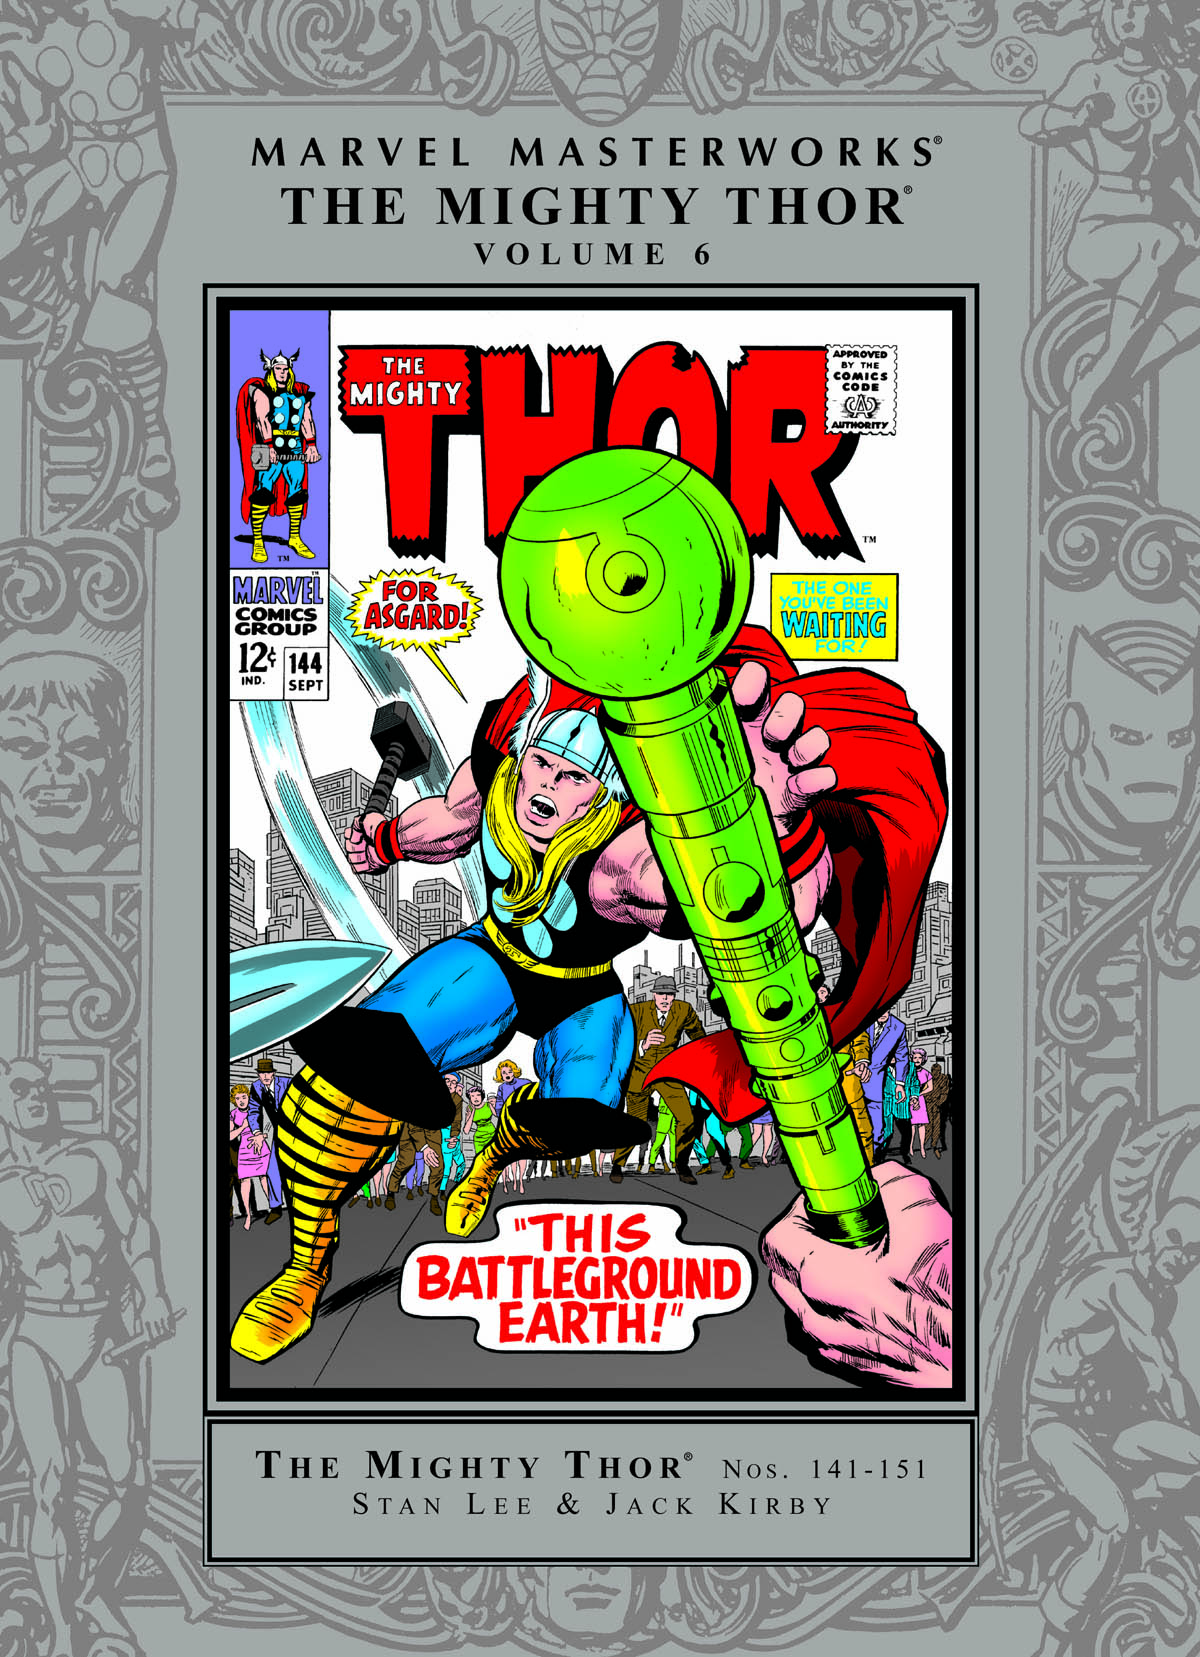 Marvel Masterworks: The Mighty Thor Vol. 8 (Trade Paperback)